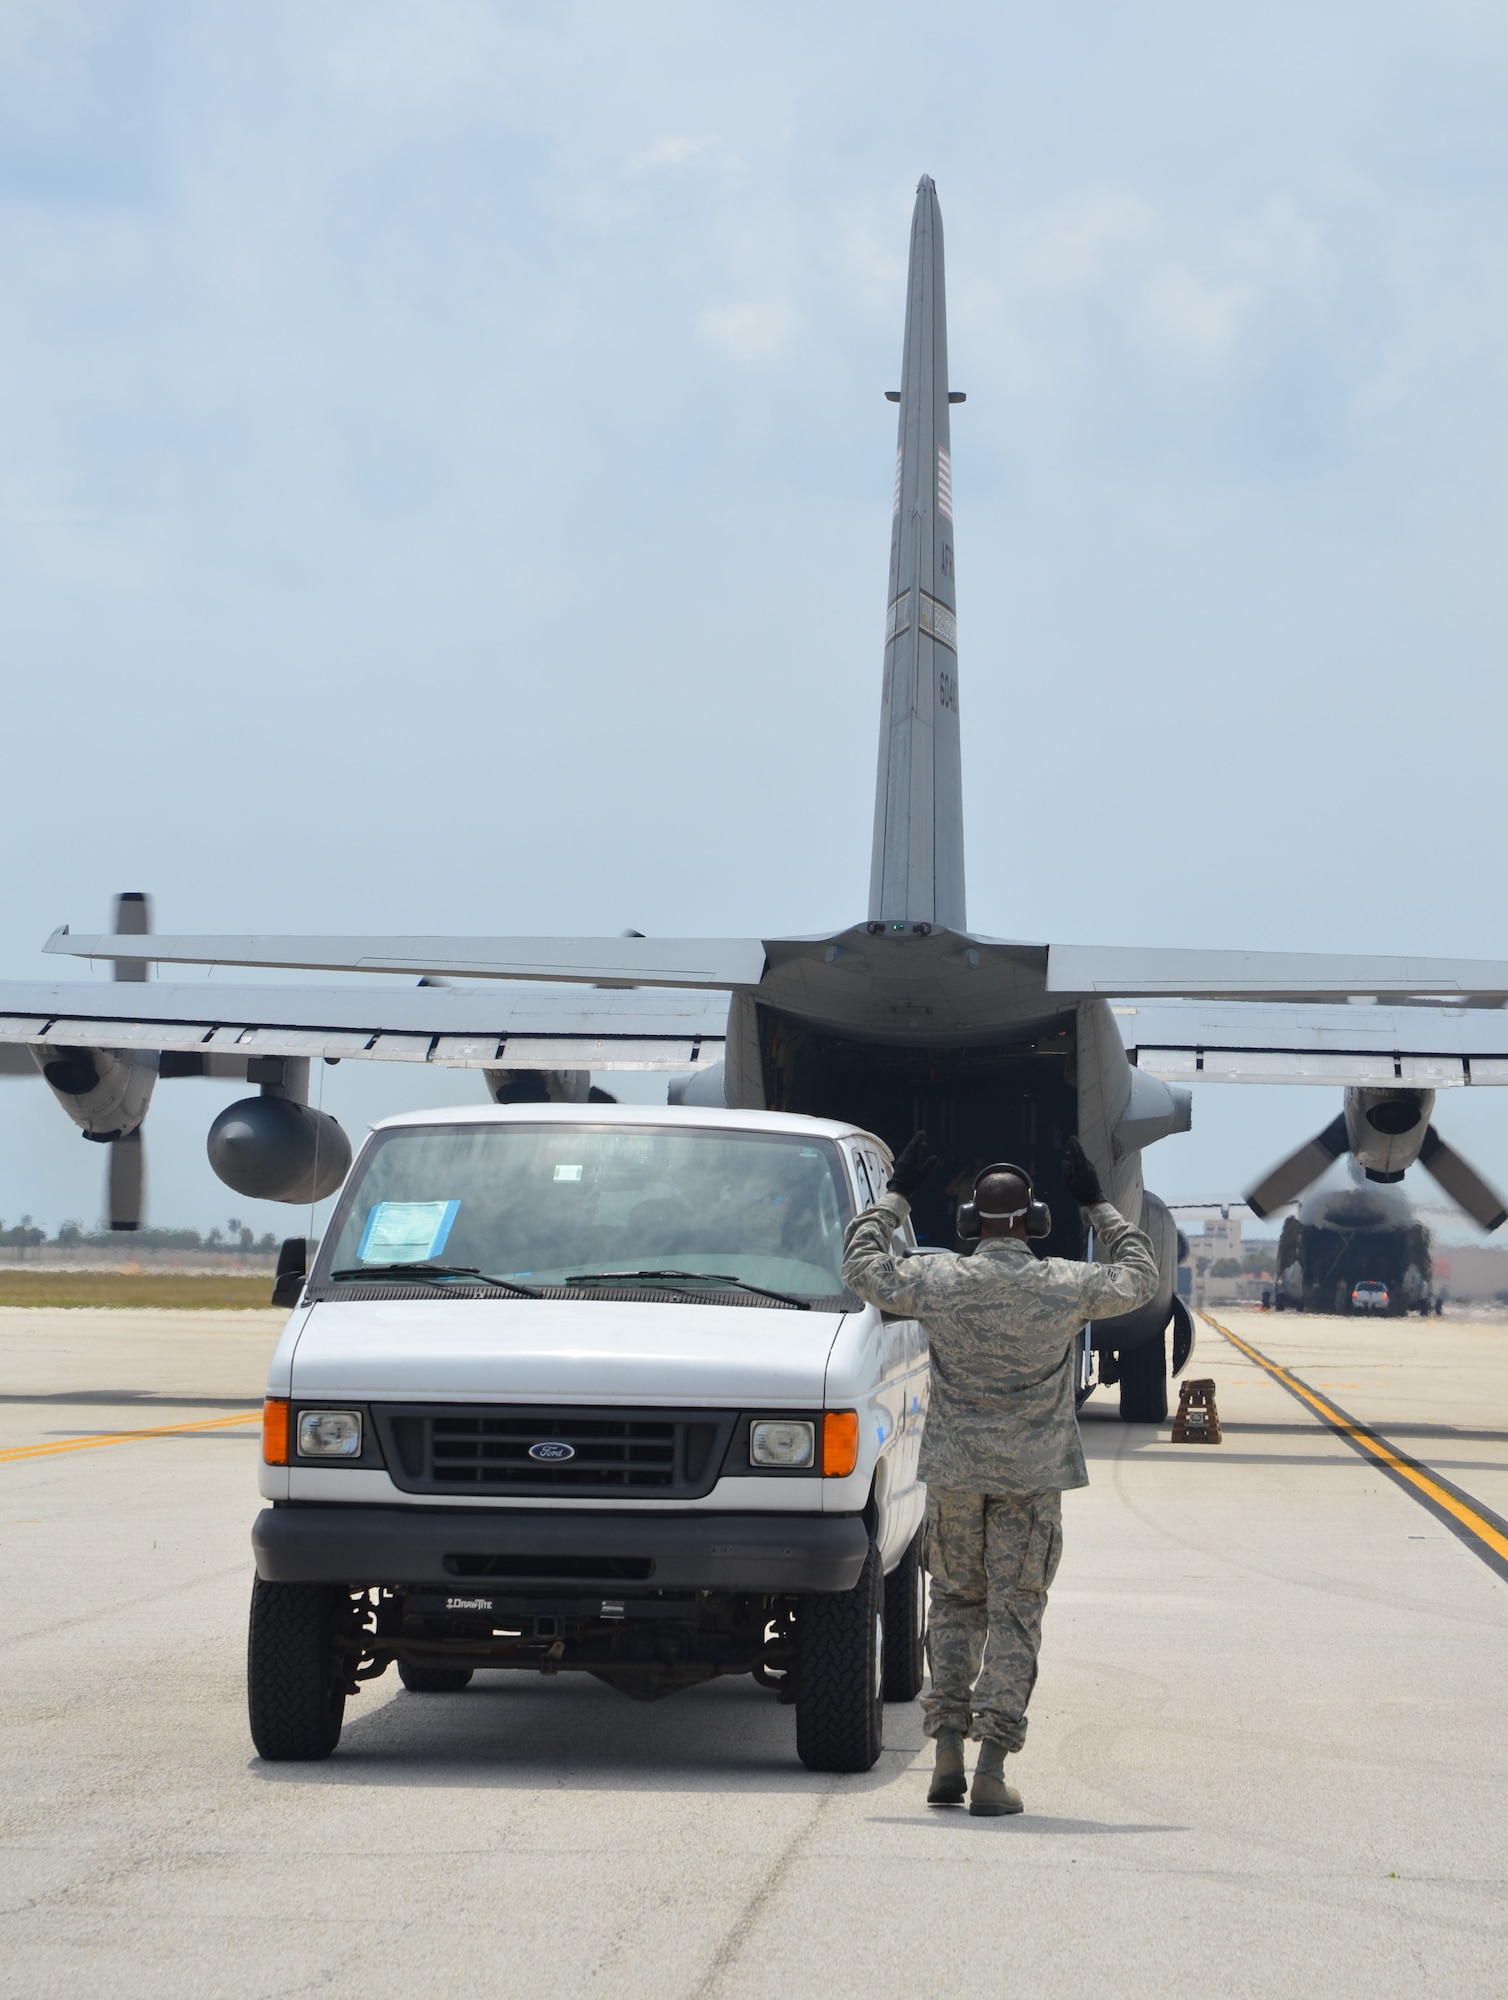 Senior Airman Andre Riobe, an aerial porter with the 42nd Aerial Port Squadron at Westover Air Reserve Base, Mass., directs a van onto a C-130 at Patrick Air Force Base, Fla., as part of Patriot Sands, an airlift exercise at MacDill Air Force Base, Fla., and Patrick AFB, Fla., April 26-29, 2012. Reservists with the 512th Airlift Control Flight, Dover Air Force Base, Del., 452nd ALCF, March Air Reserve Base, Calif., and 439th ALCF, Westover ARB, trained with FBI Rapid Deployment Teams during the exercise. (U.S. Air Force photo by Capt. Marnee A.C. Losurdo)